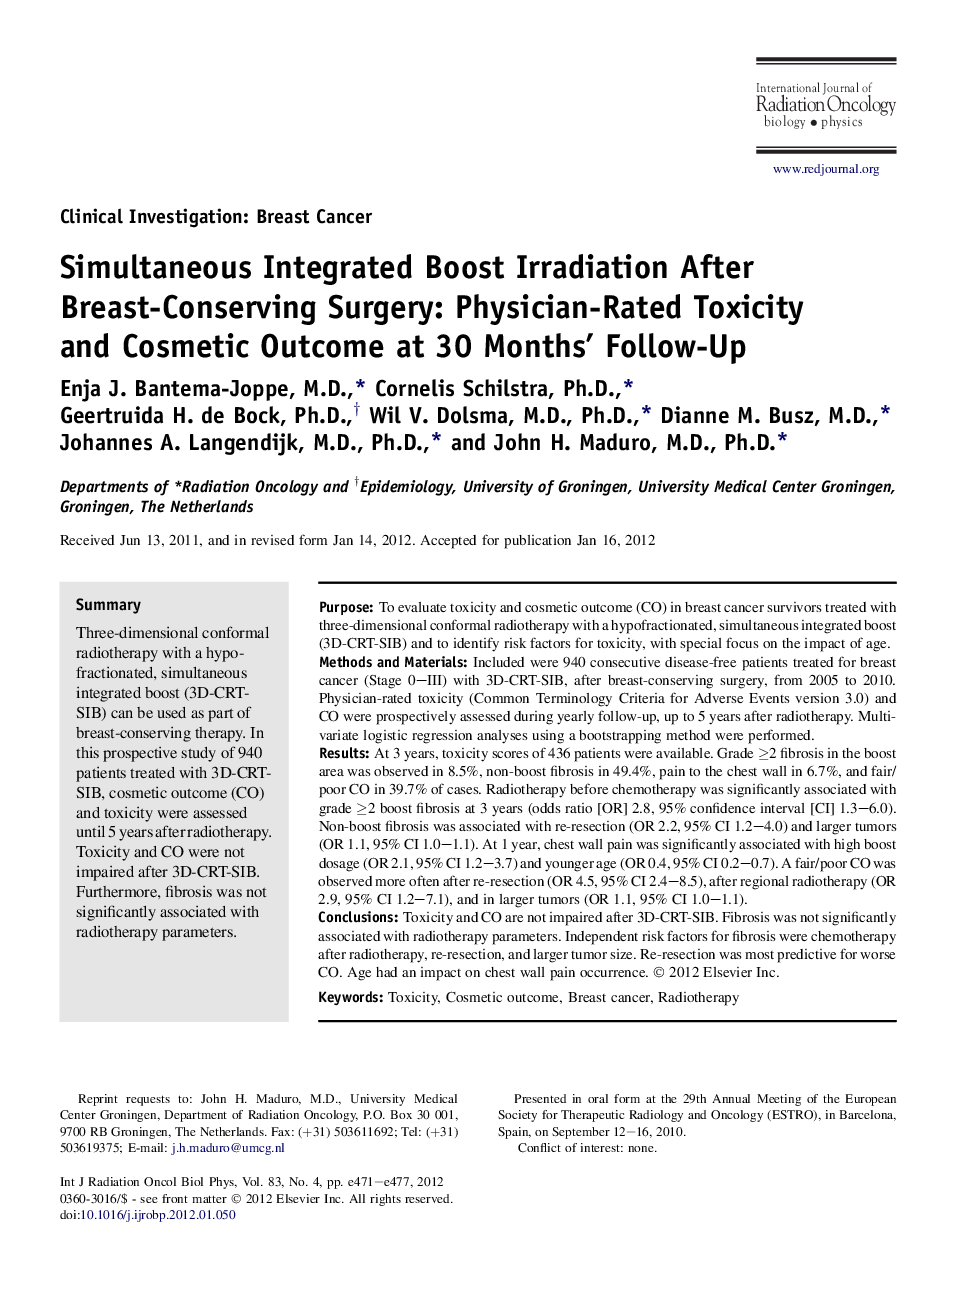 Simultaneous Integrated Boost Irradiation After Breast-Conserving Surgery: Physician-Rated Toxicity andÂ Cosmetic Outcome at 30 Months' Follow-Up